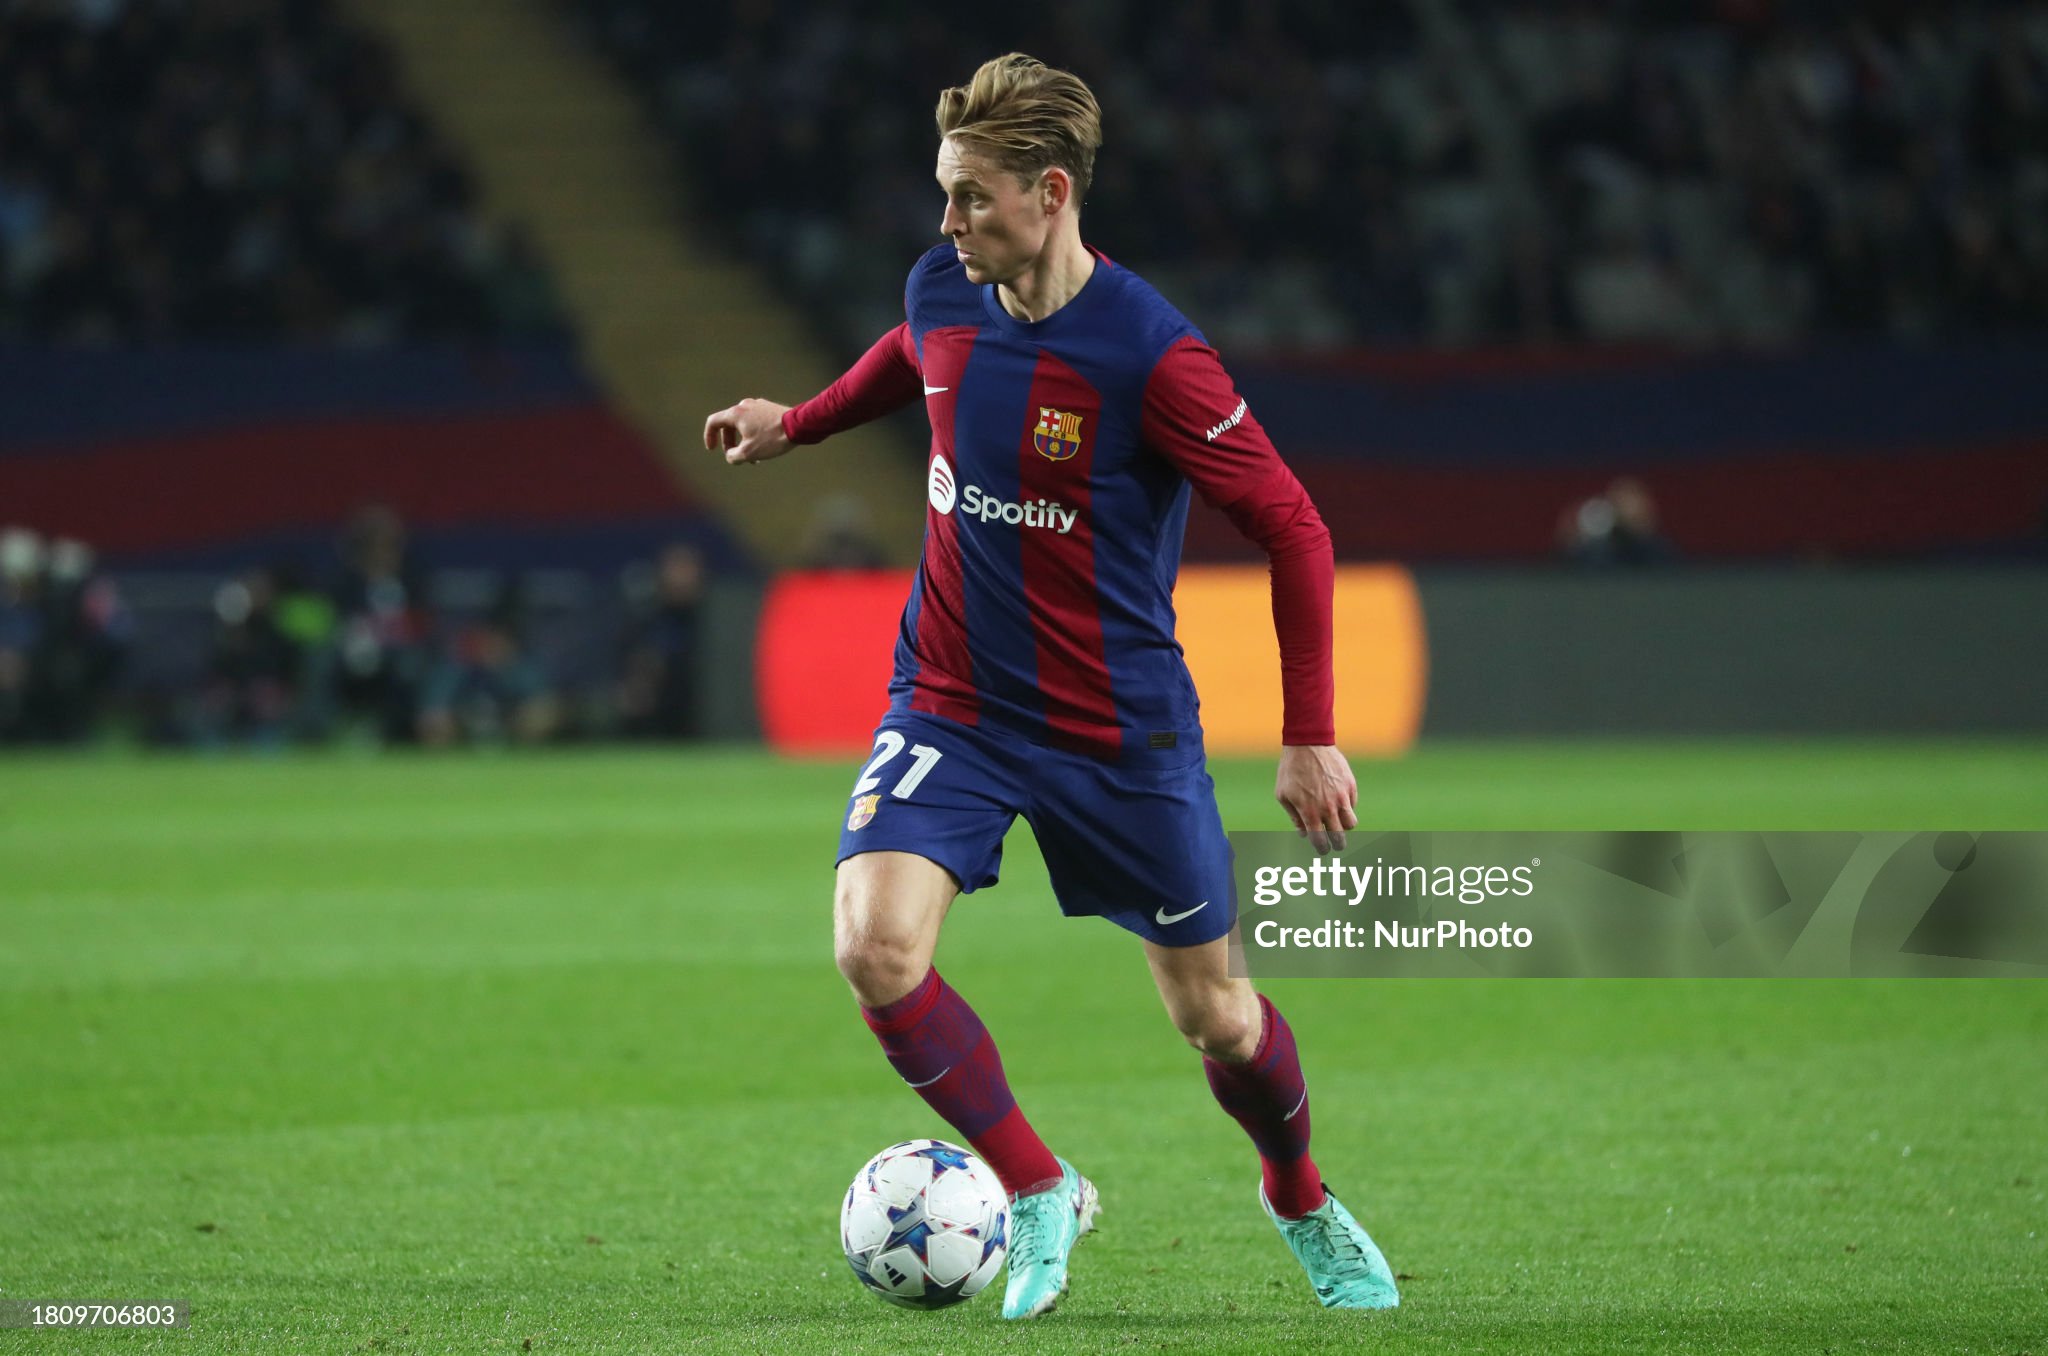 Praise and Criticism for De Jong at Barcelona: 'He Makes a Huge Difference'